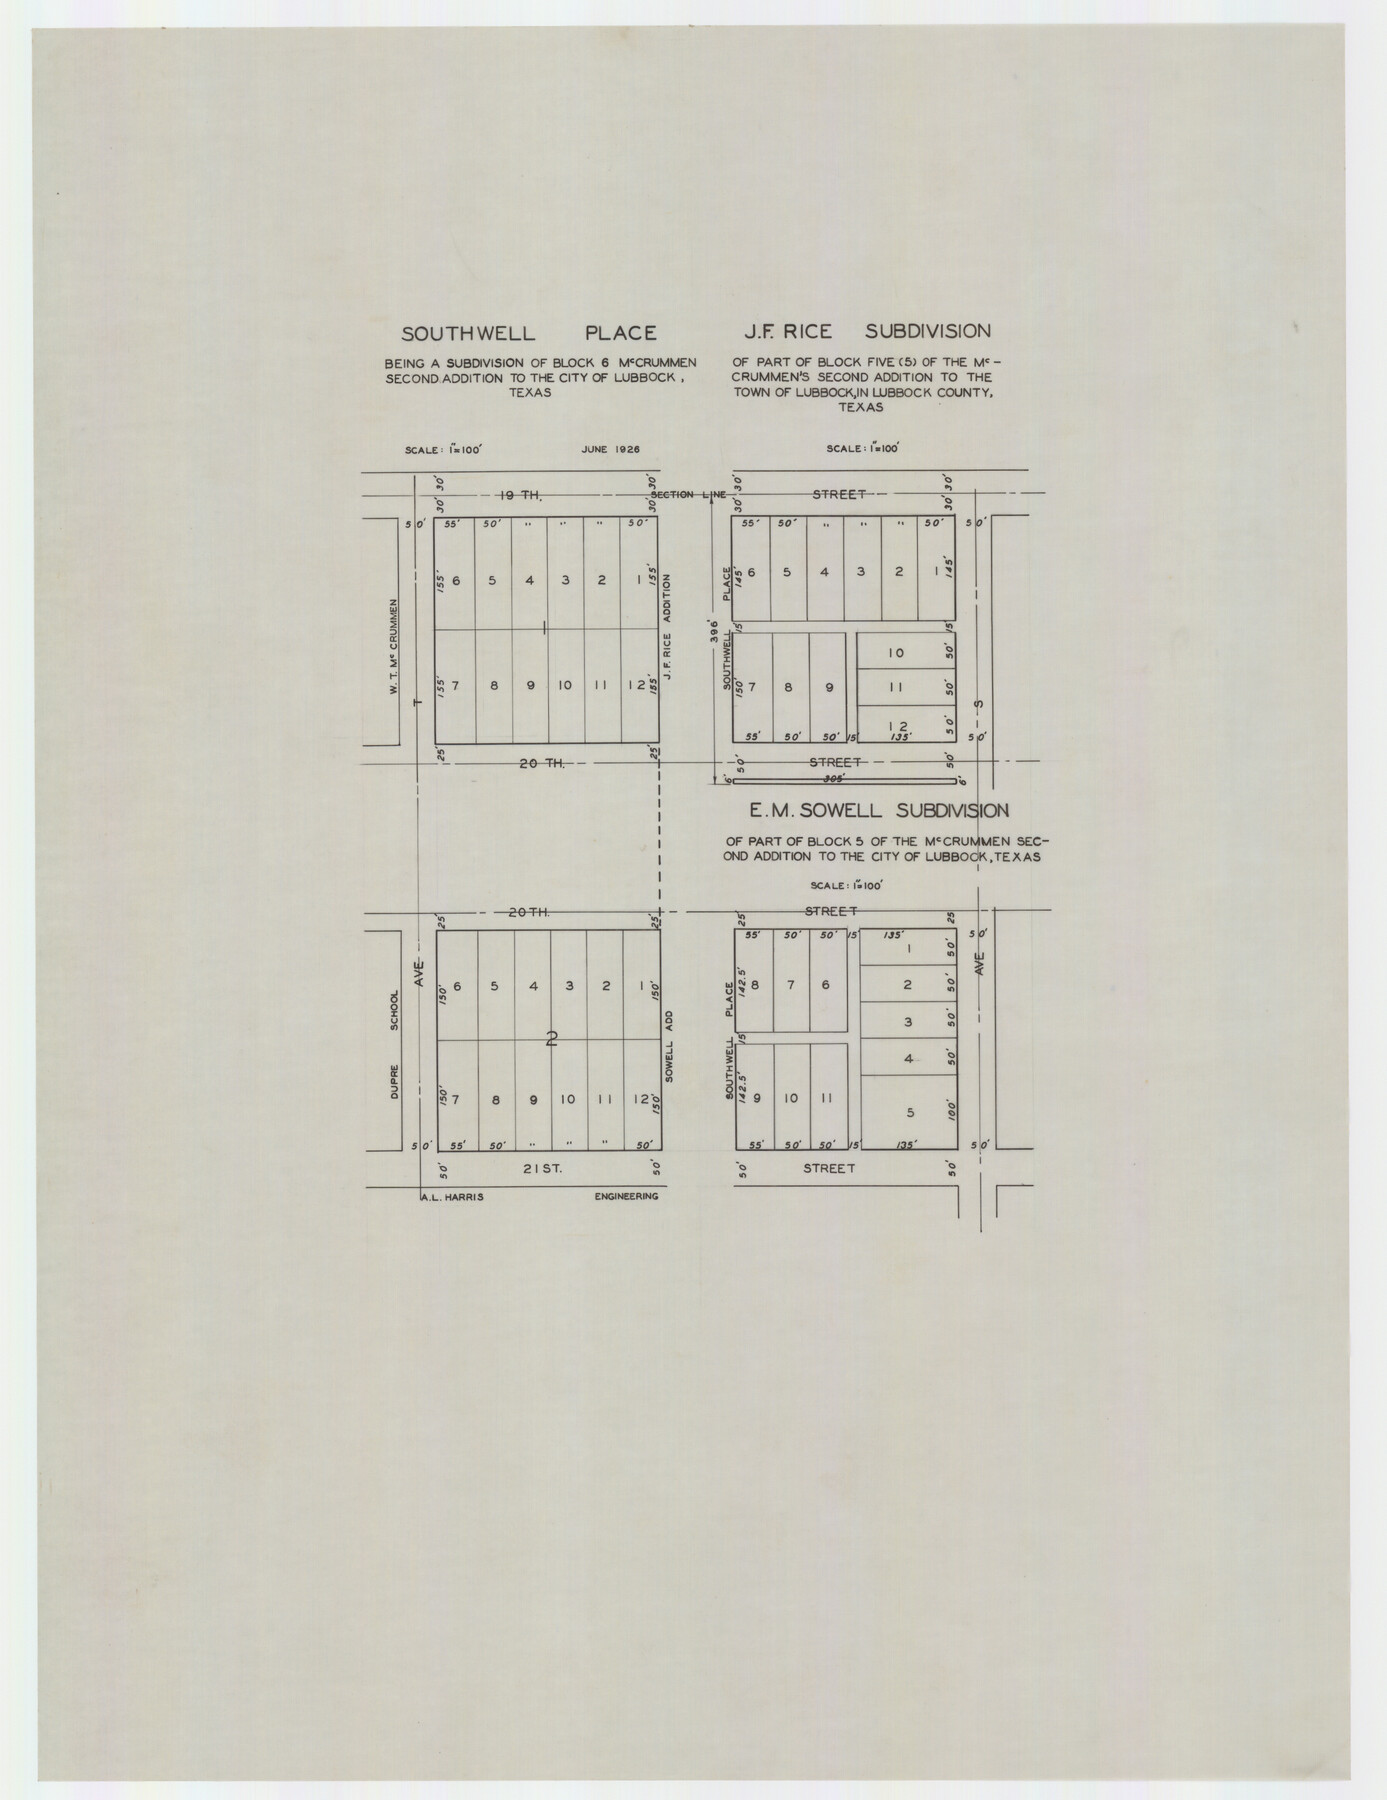 92745, Southwell Place and J. F. Rice Subdivision, Twichell Survey Records